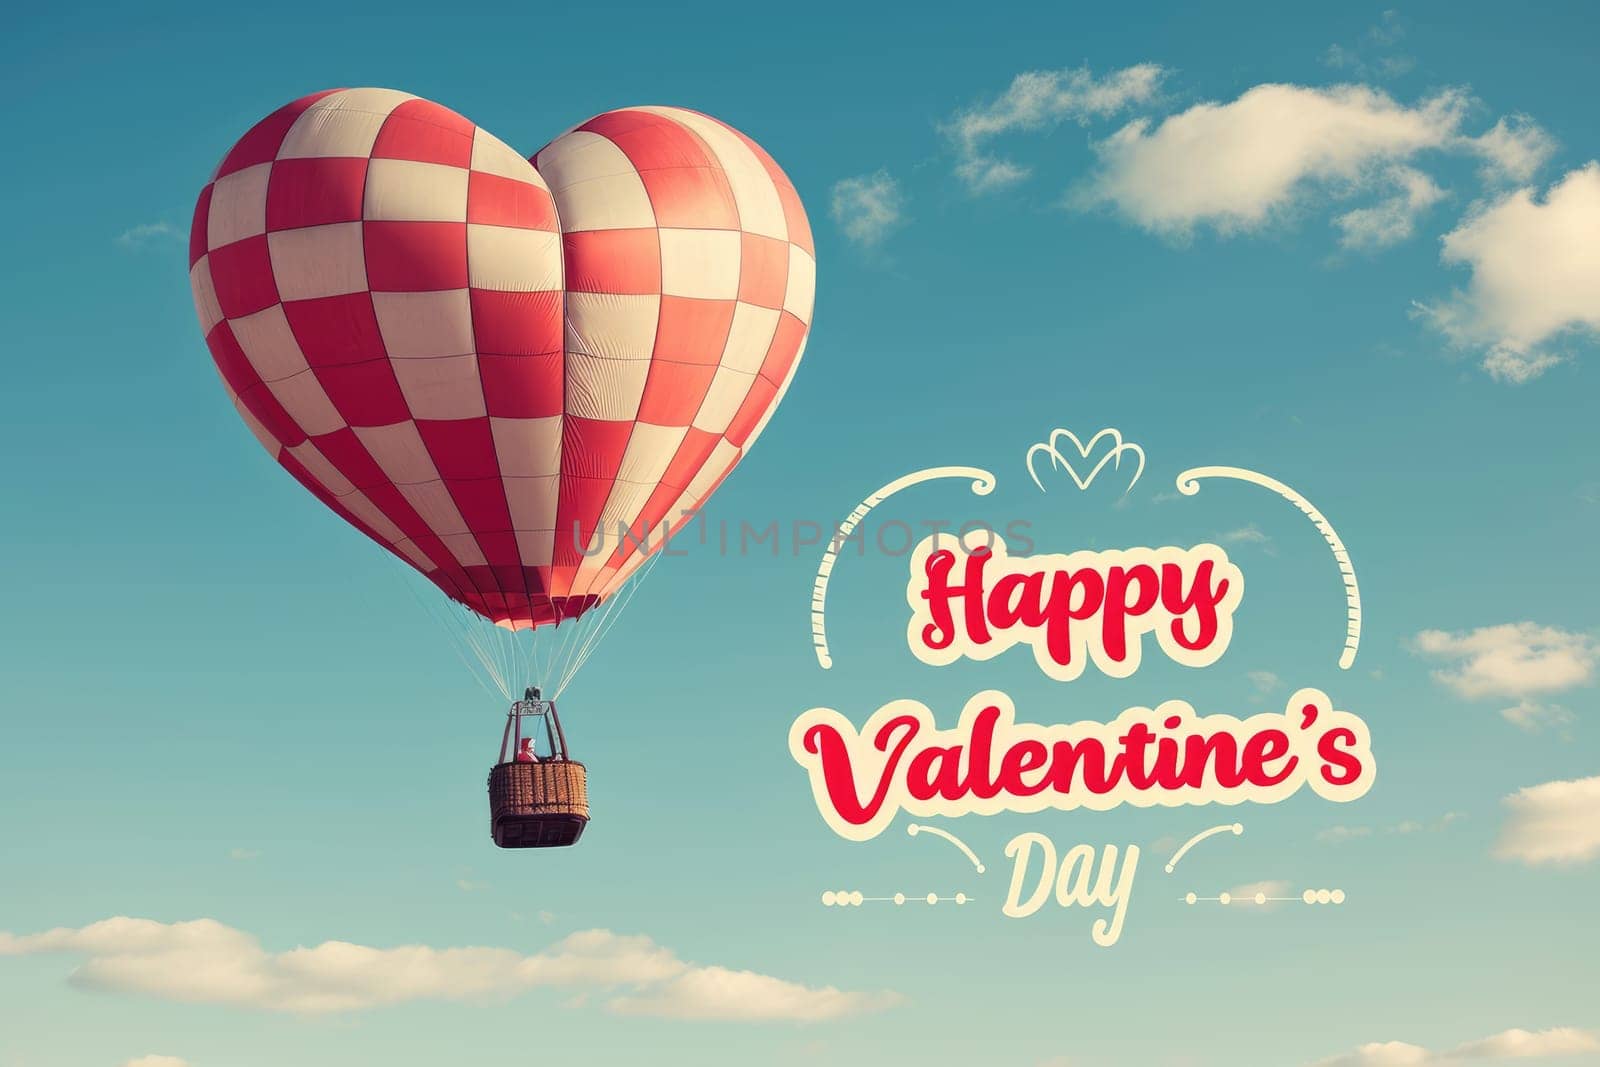 happy valentines day hot air balloon of red on sky pragma by biancoblue